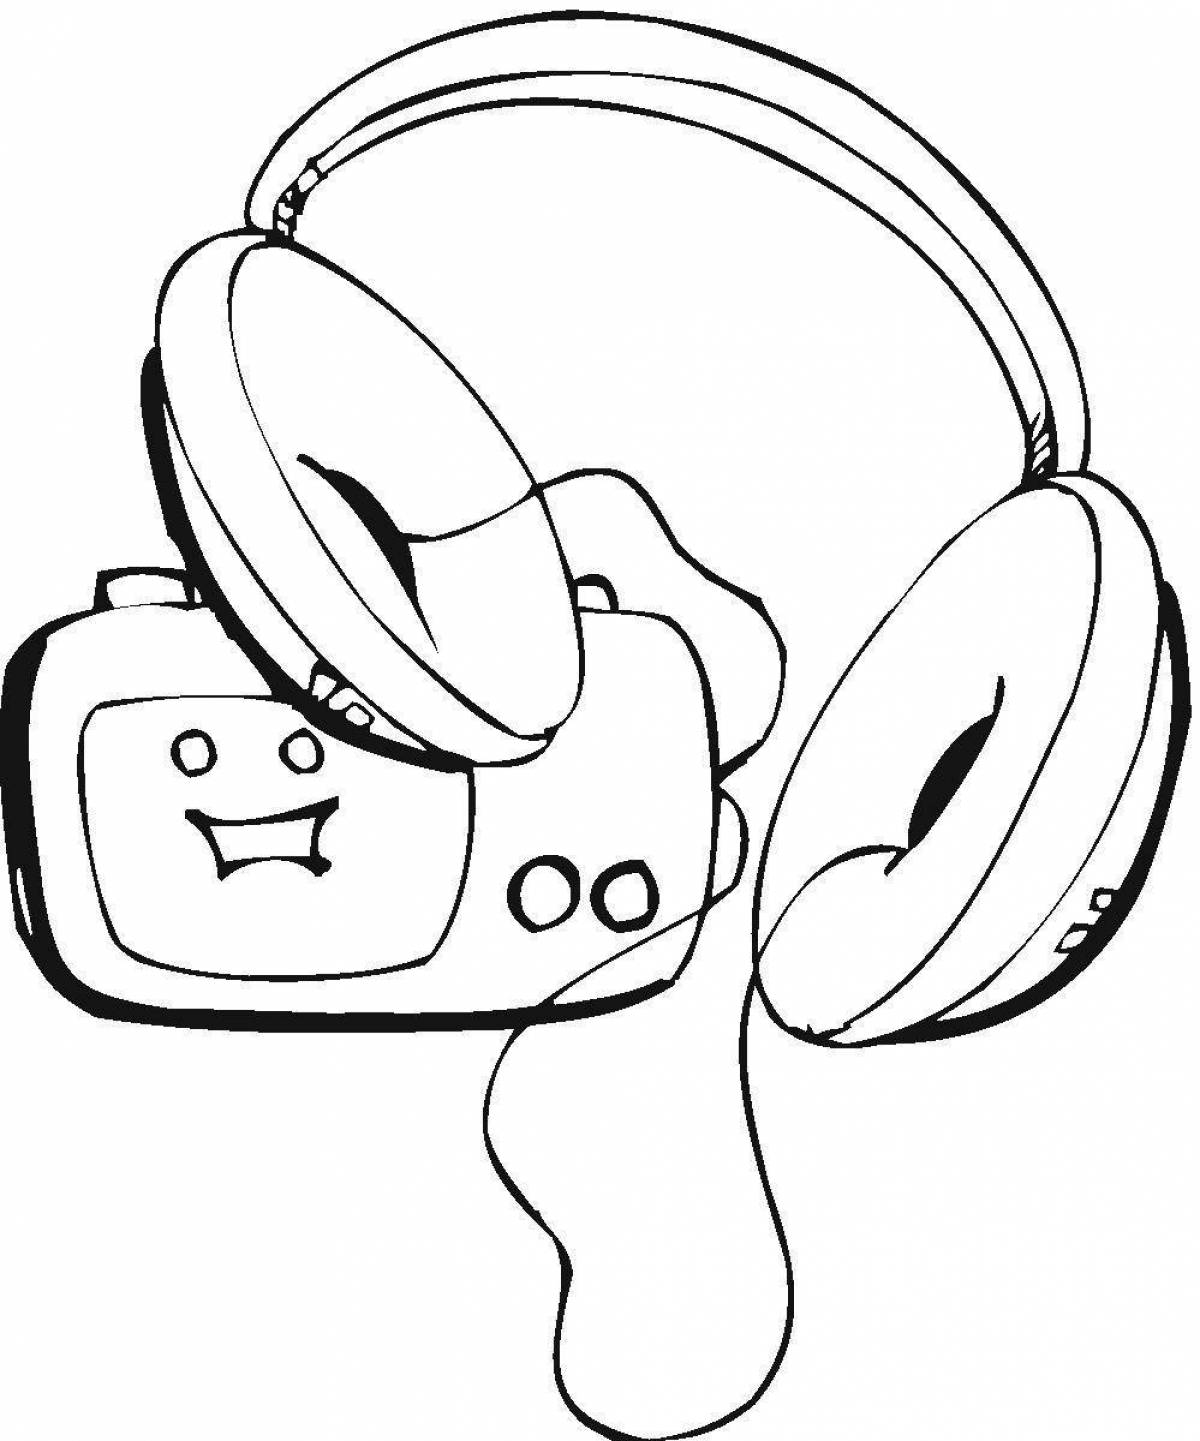 Color-explosive music center coloring page